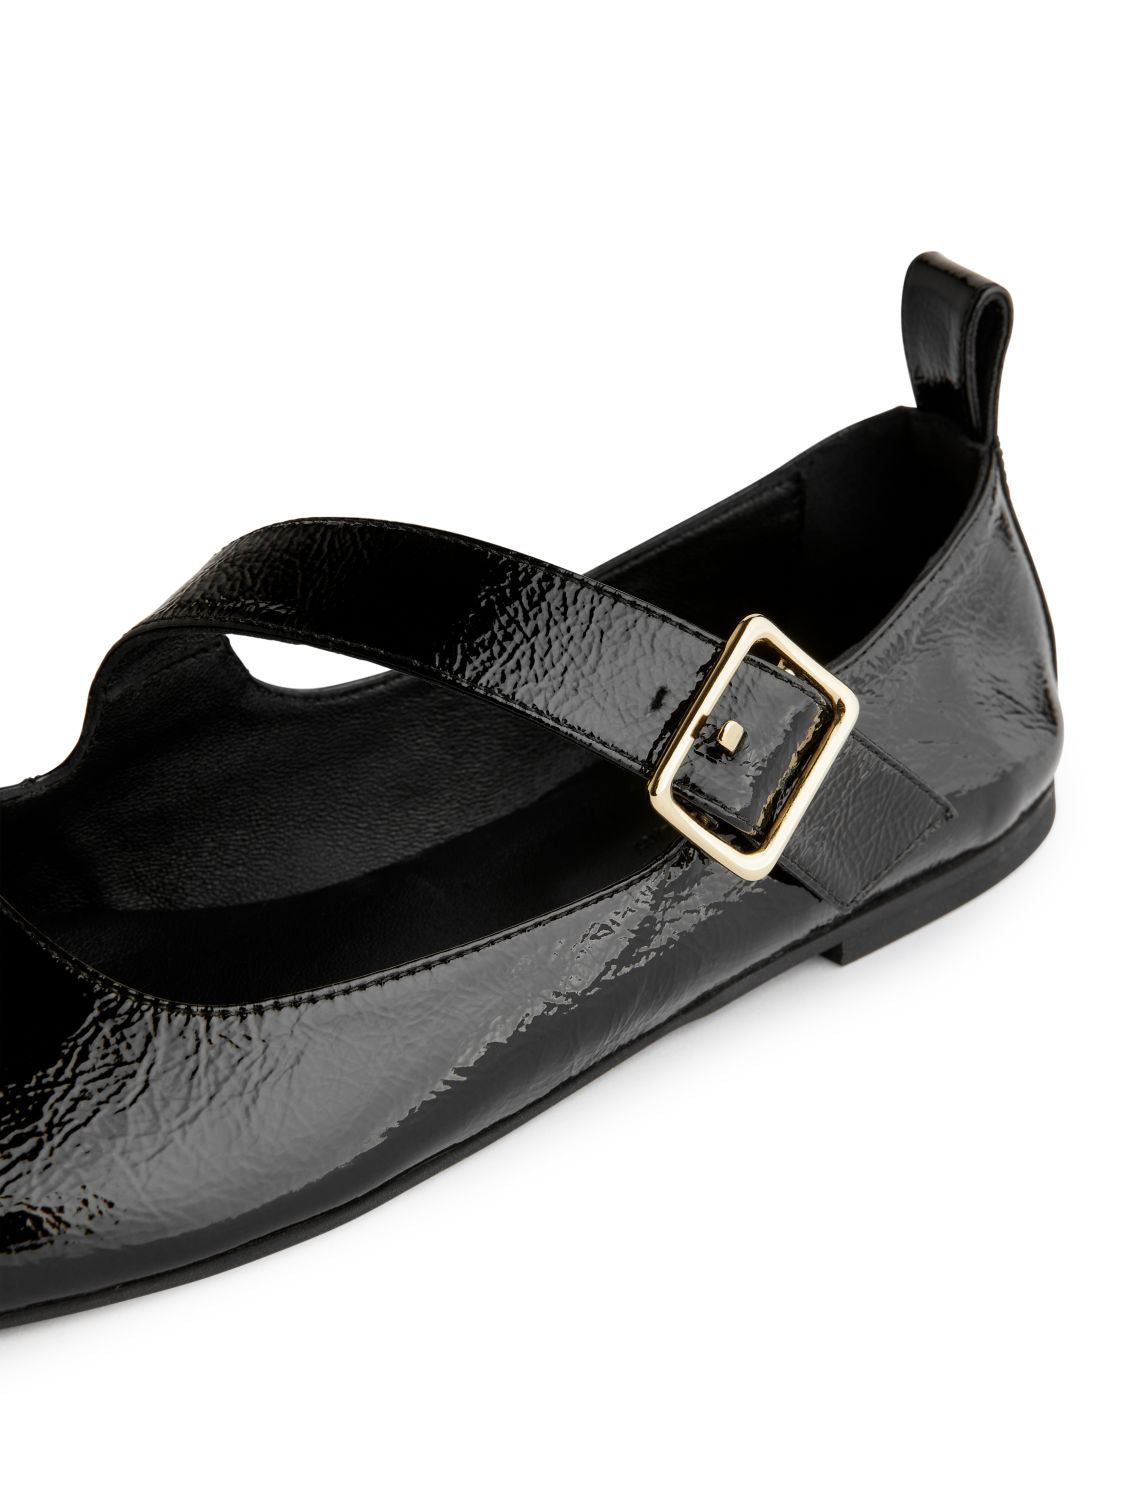 Mary Jane leather ballet flats